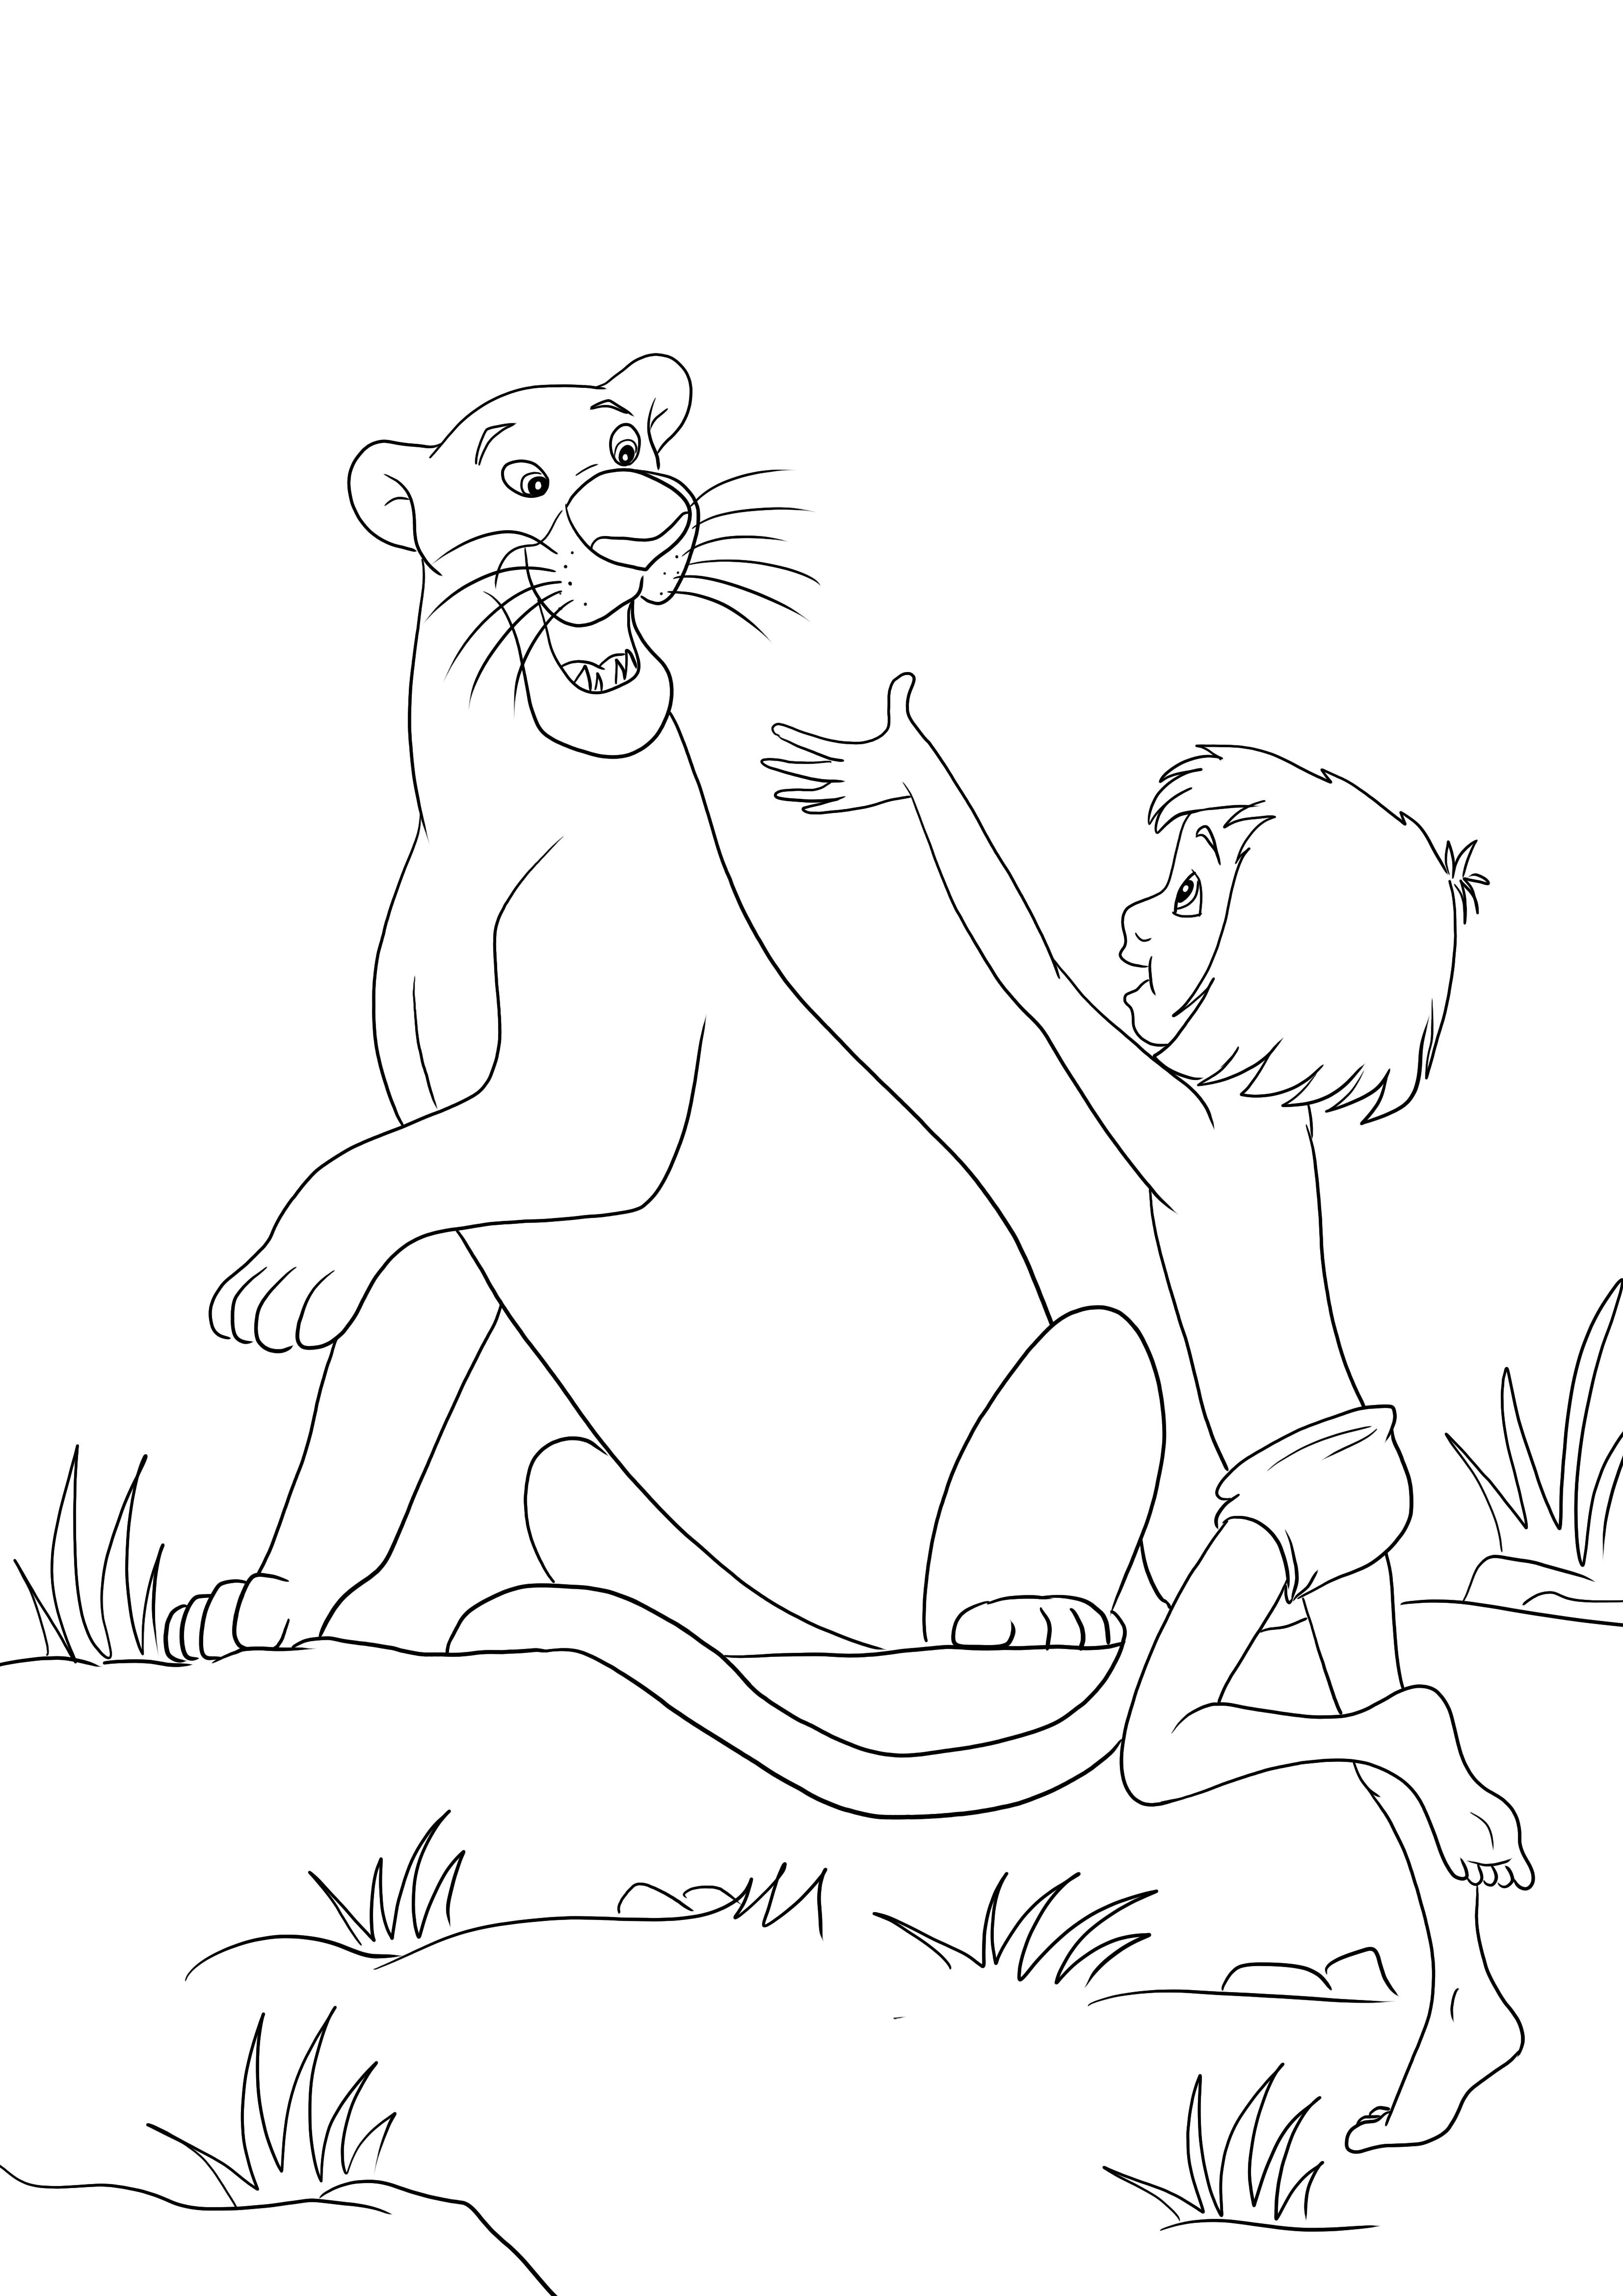 Mowgli and Bagheera are happy together-free coloring and downloading image